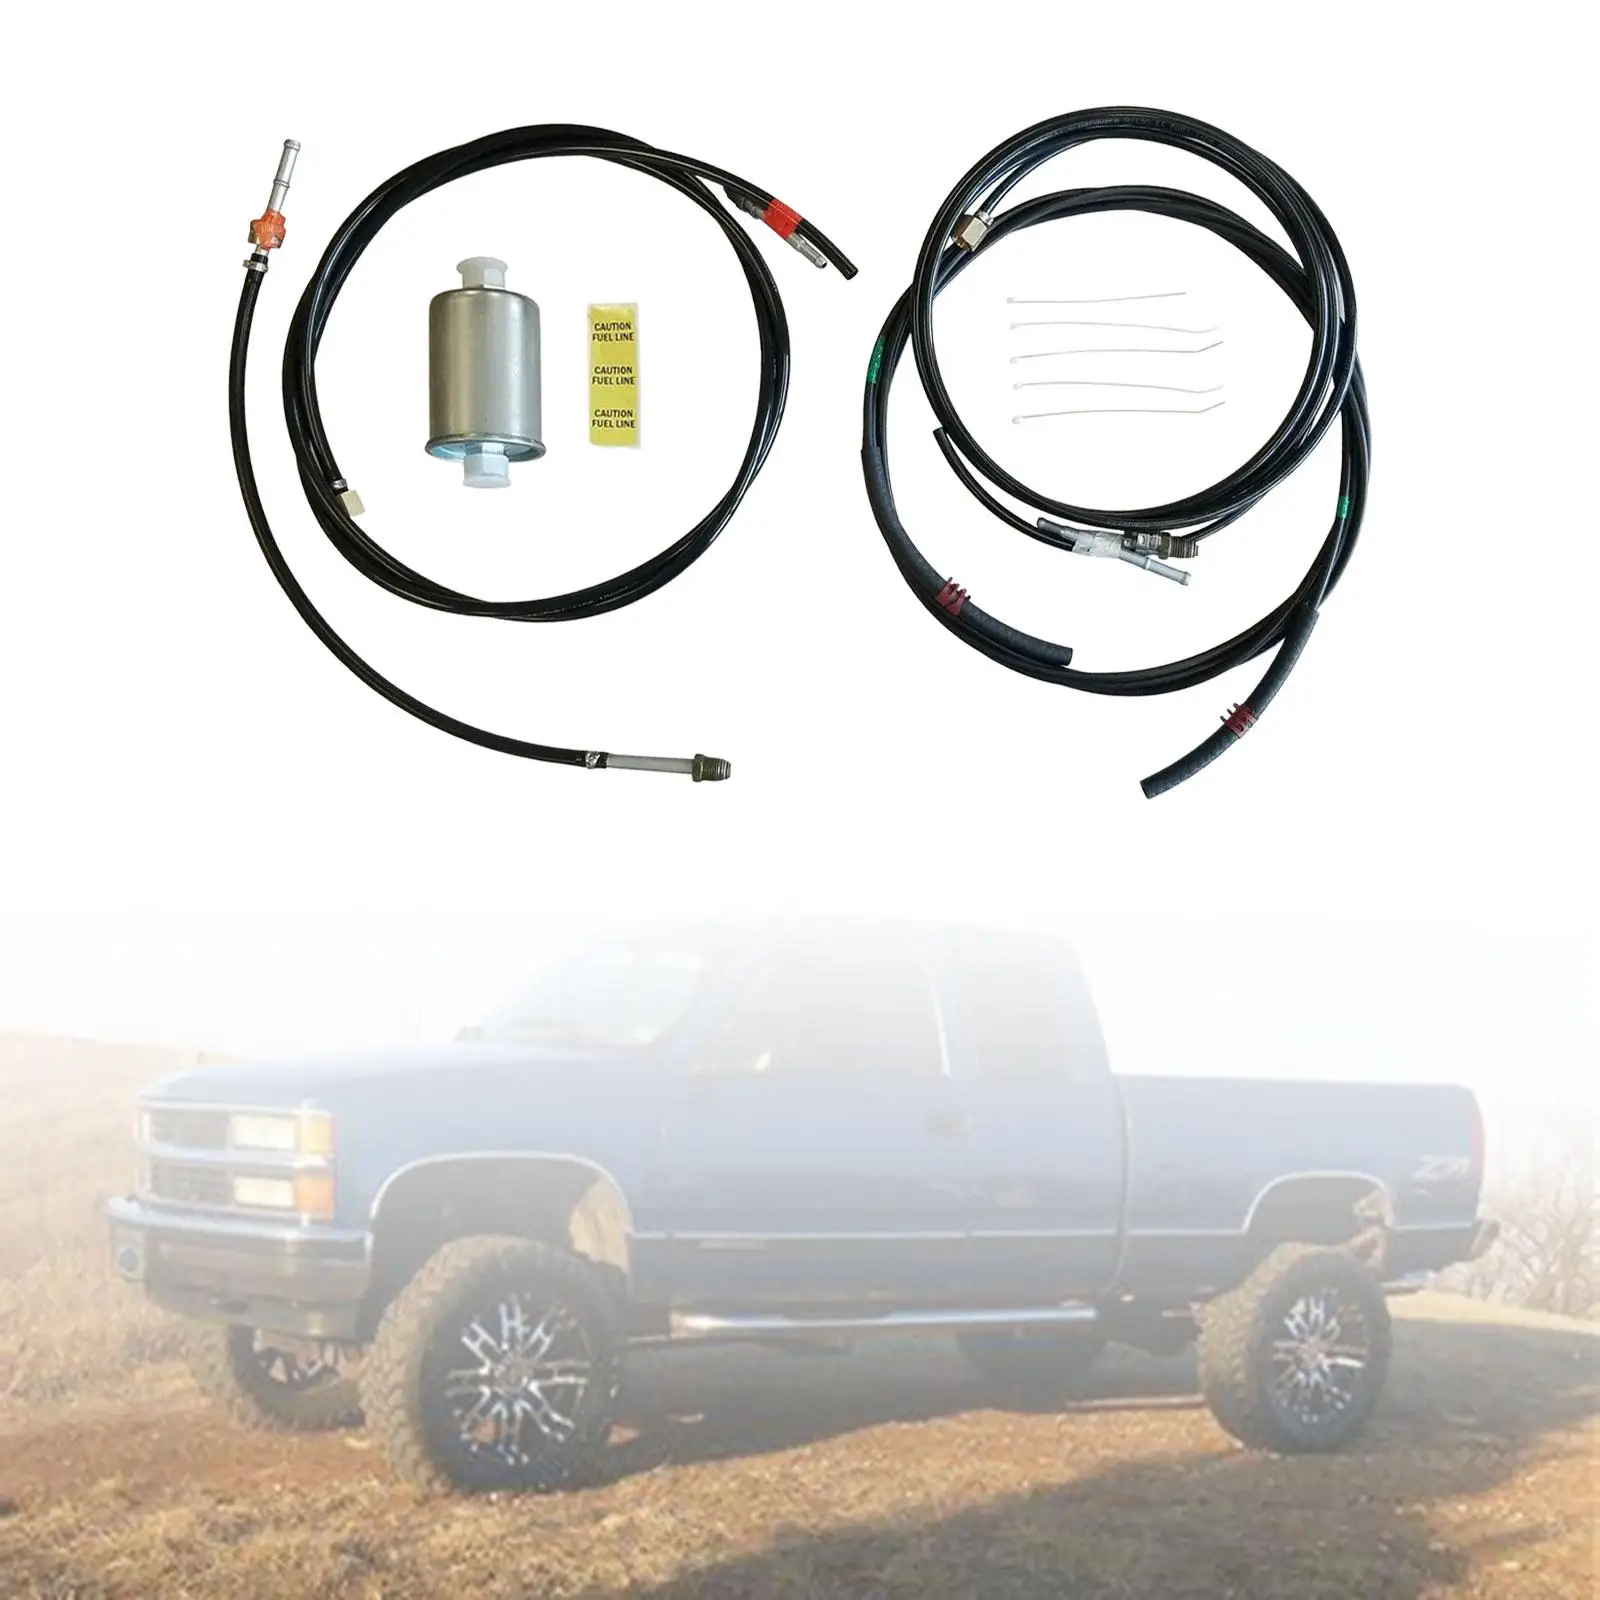 Fuel Line Kit Nfr0013 Durable Spare Parts Automotive Parts Replacement Tube Set for Chevrolet Easy Installation